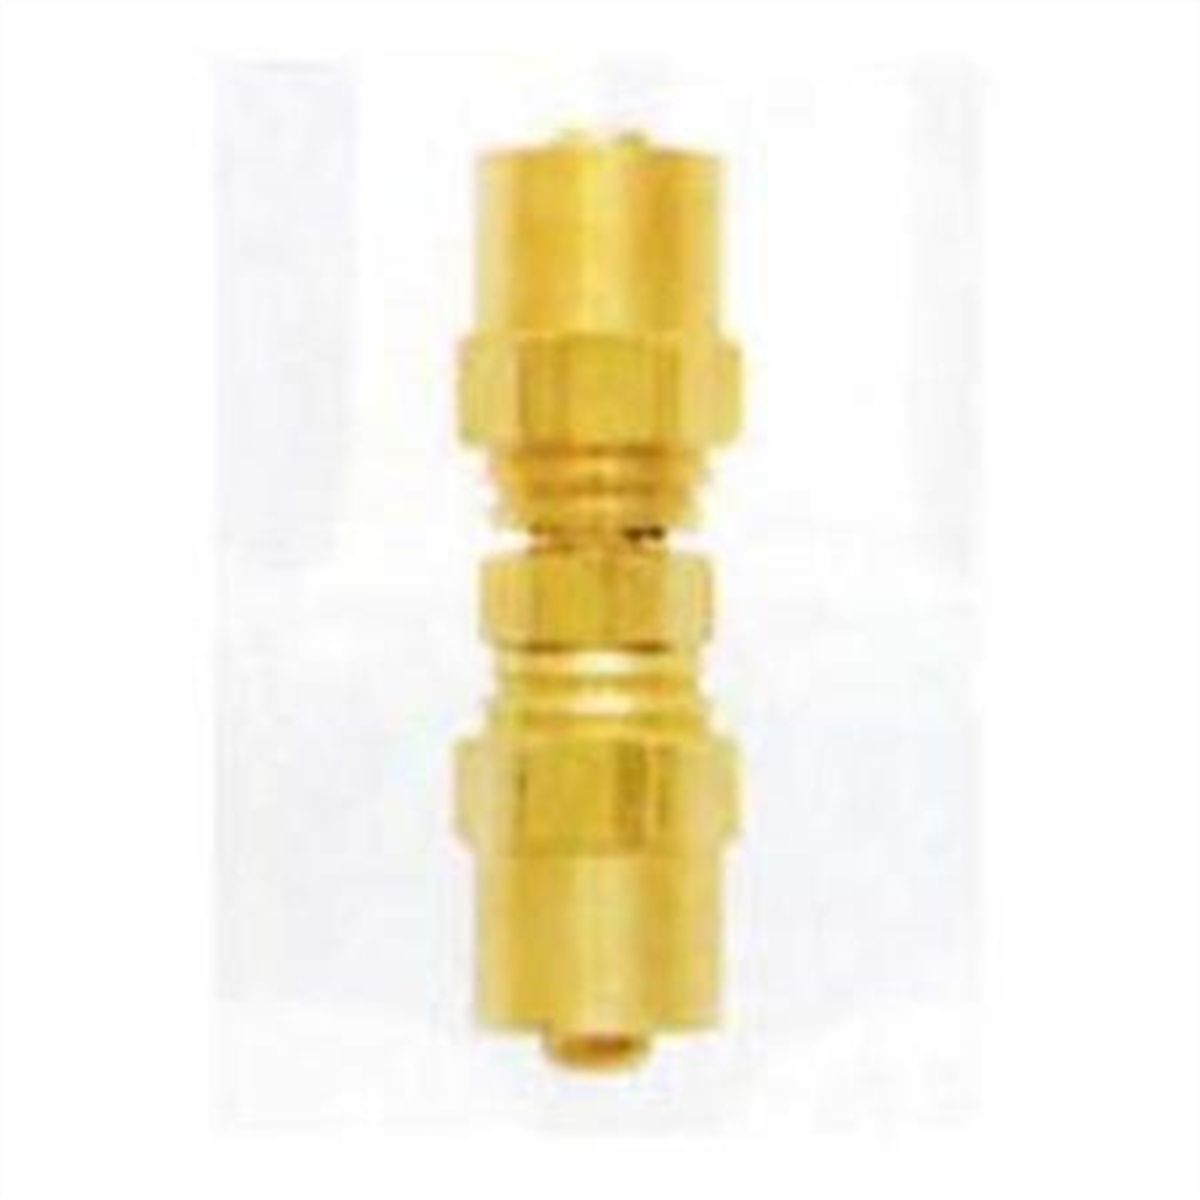 Re-Usable Brass Hose Fitting Mender -1/4 In ID x 5/8 In OD